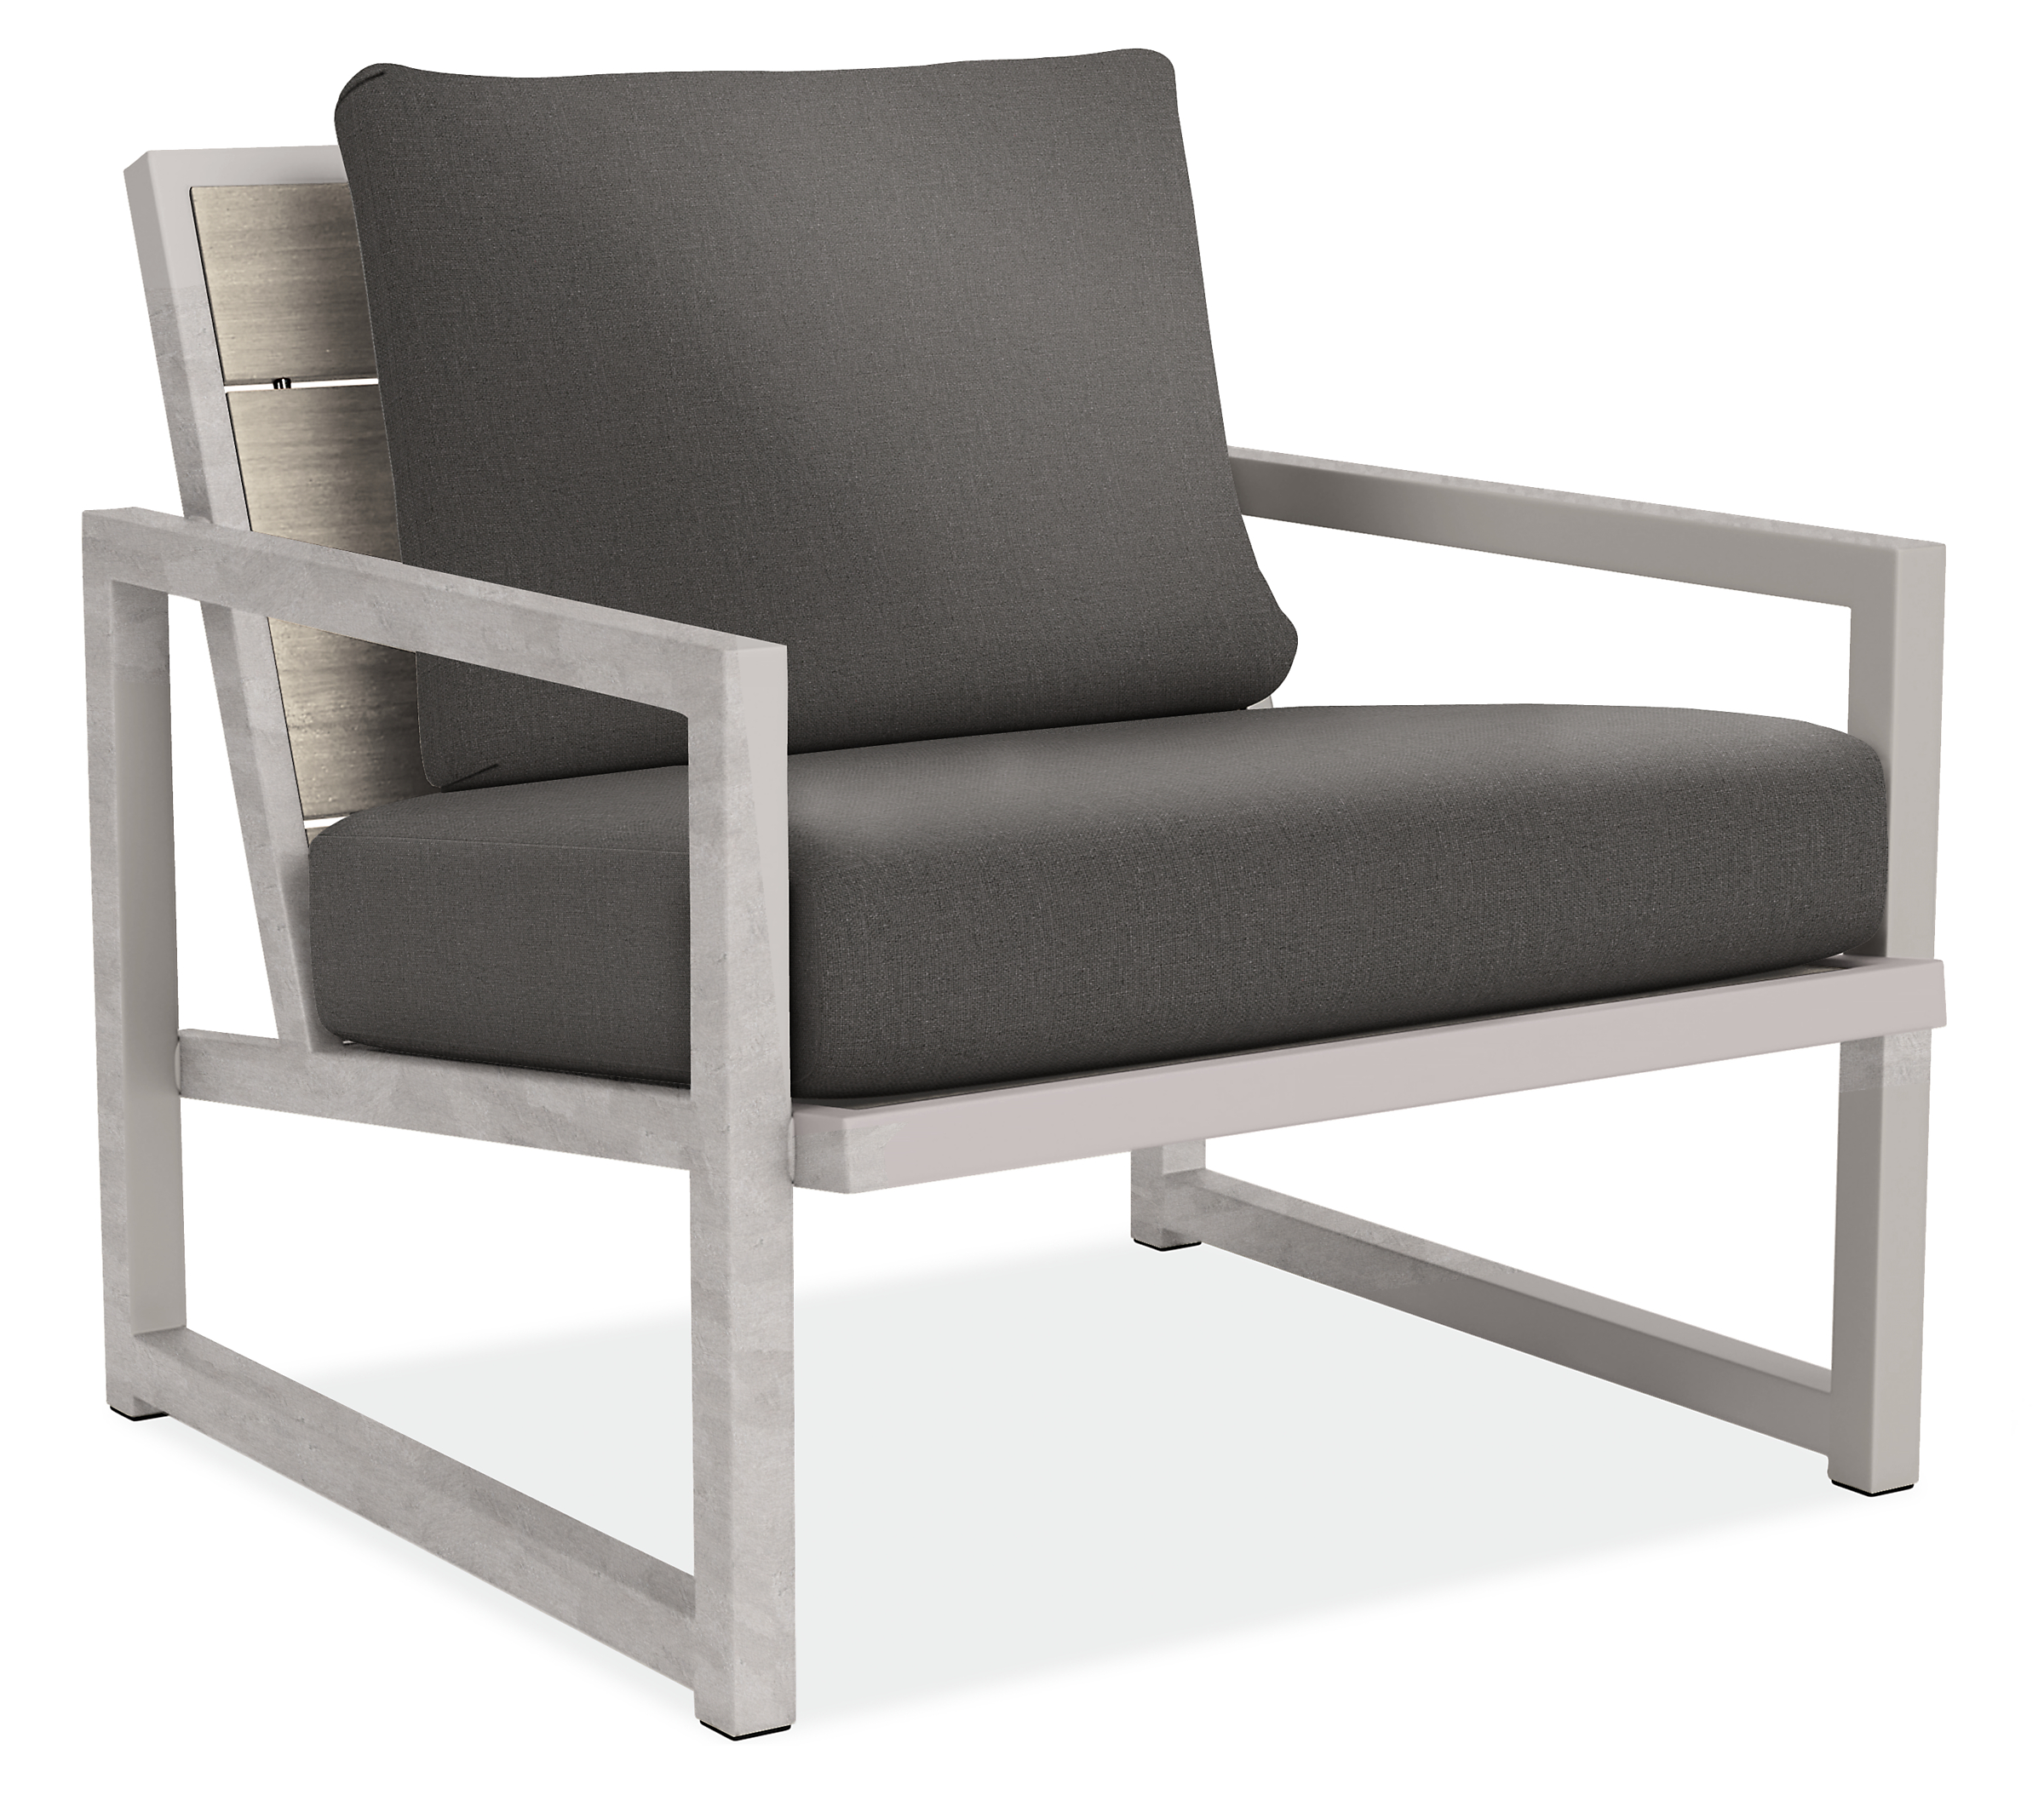 Montego 32" Lounge Chair in Thermally Modified Ash with Cushions